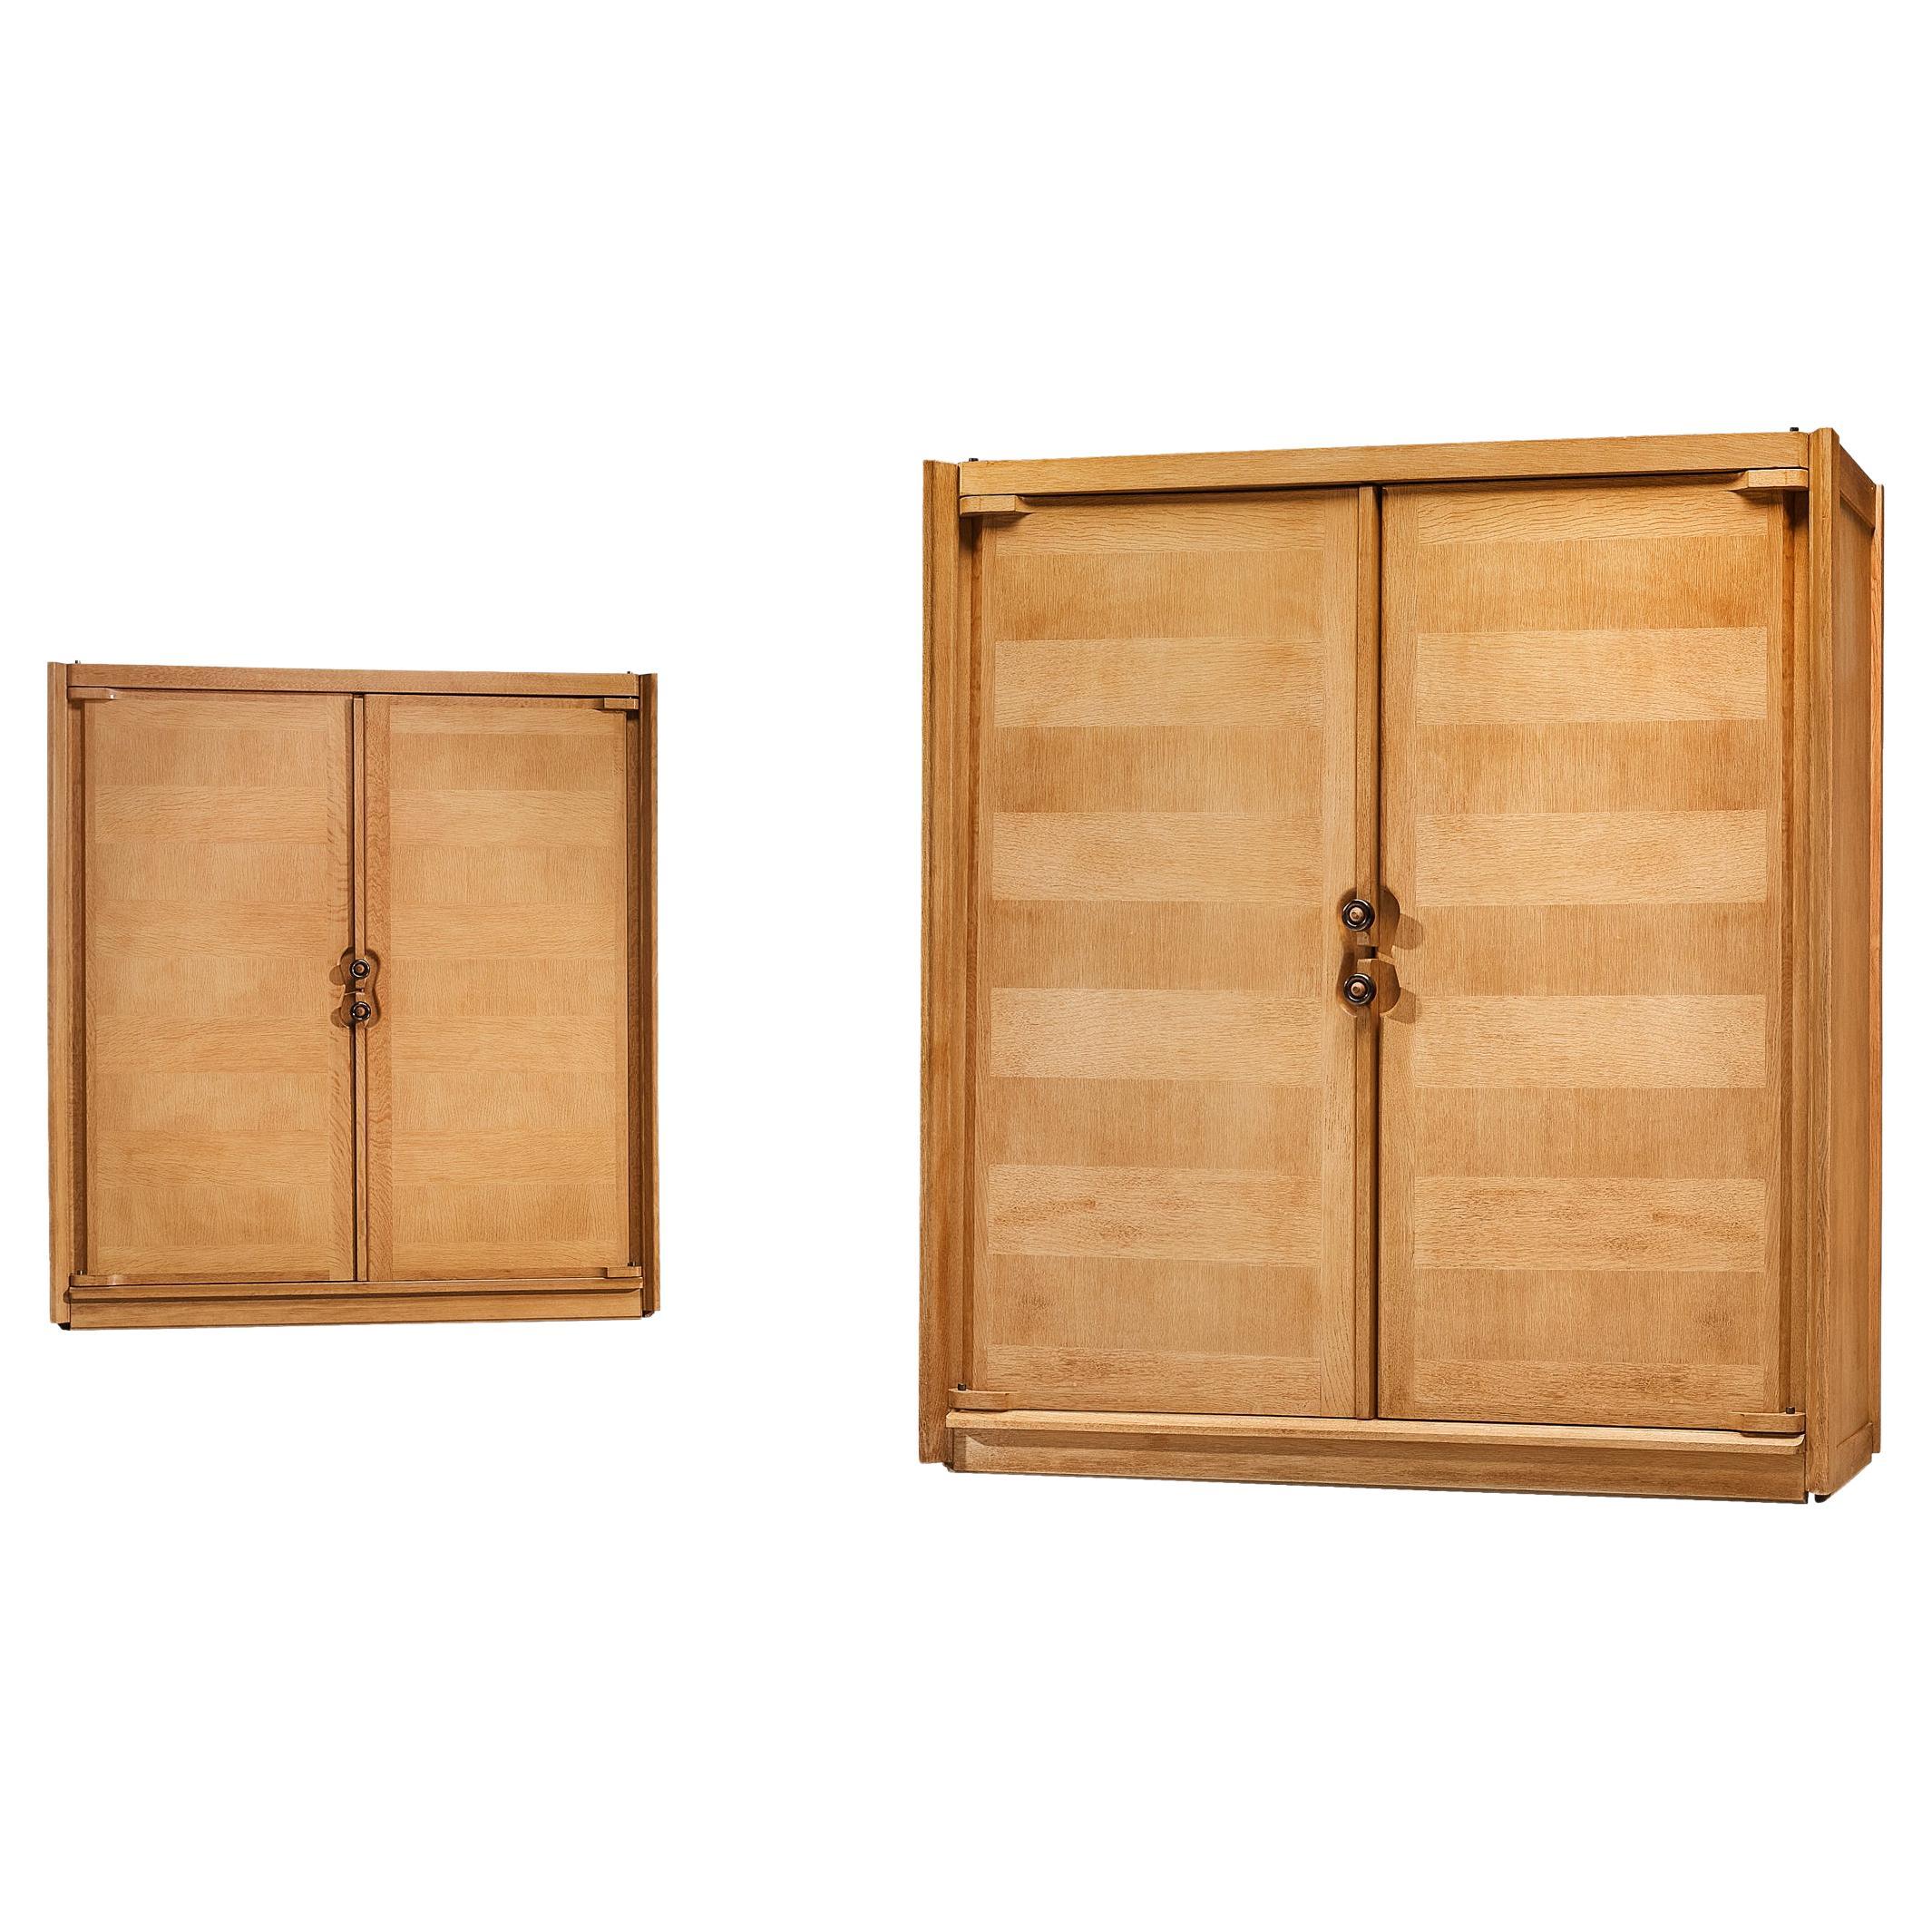 Guillerme et Chambron Wardrobes with Ceramic Handles